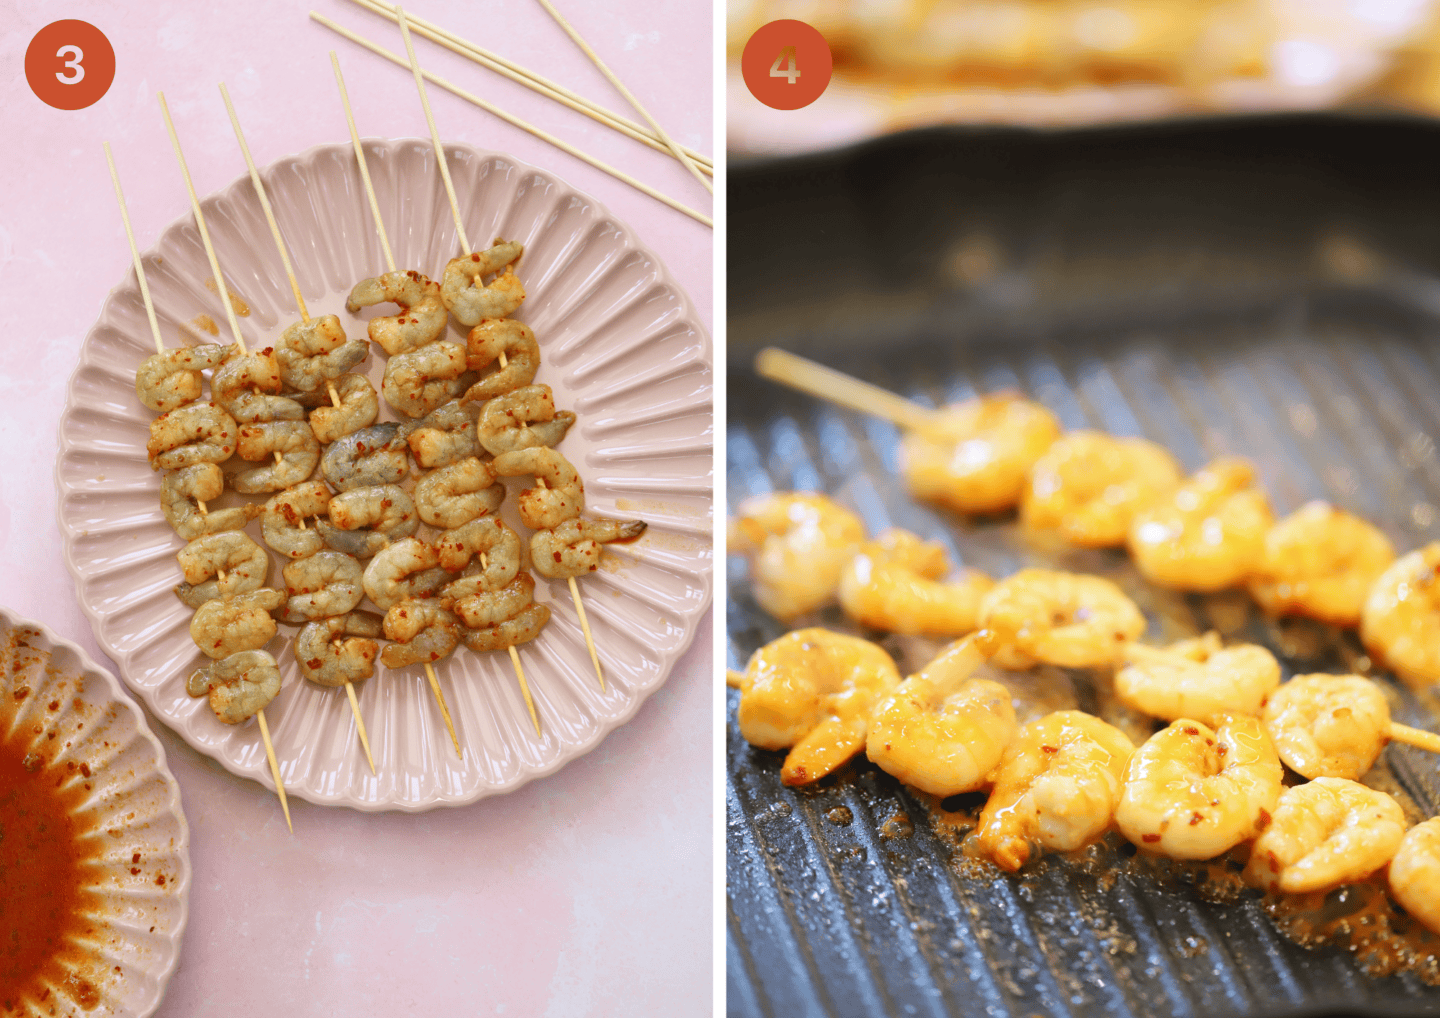 Raw king prawn skewers on a plate and cooking in a pan.